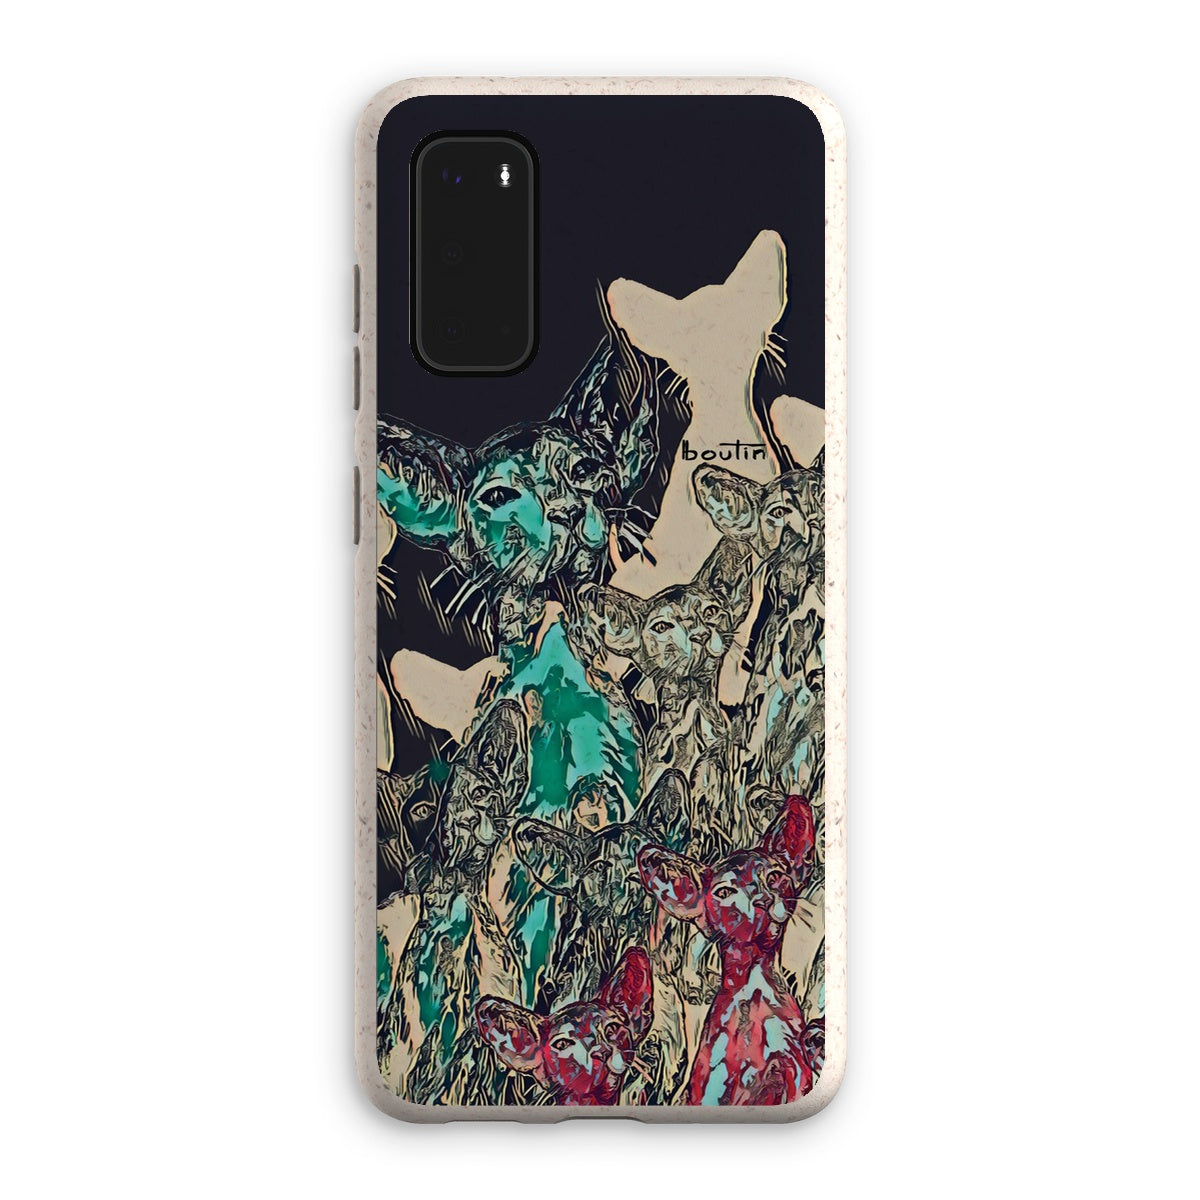 Les Cleopatre marine eco-friendly cell phone case